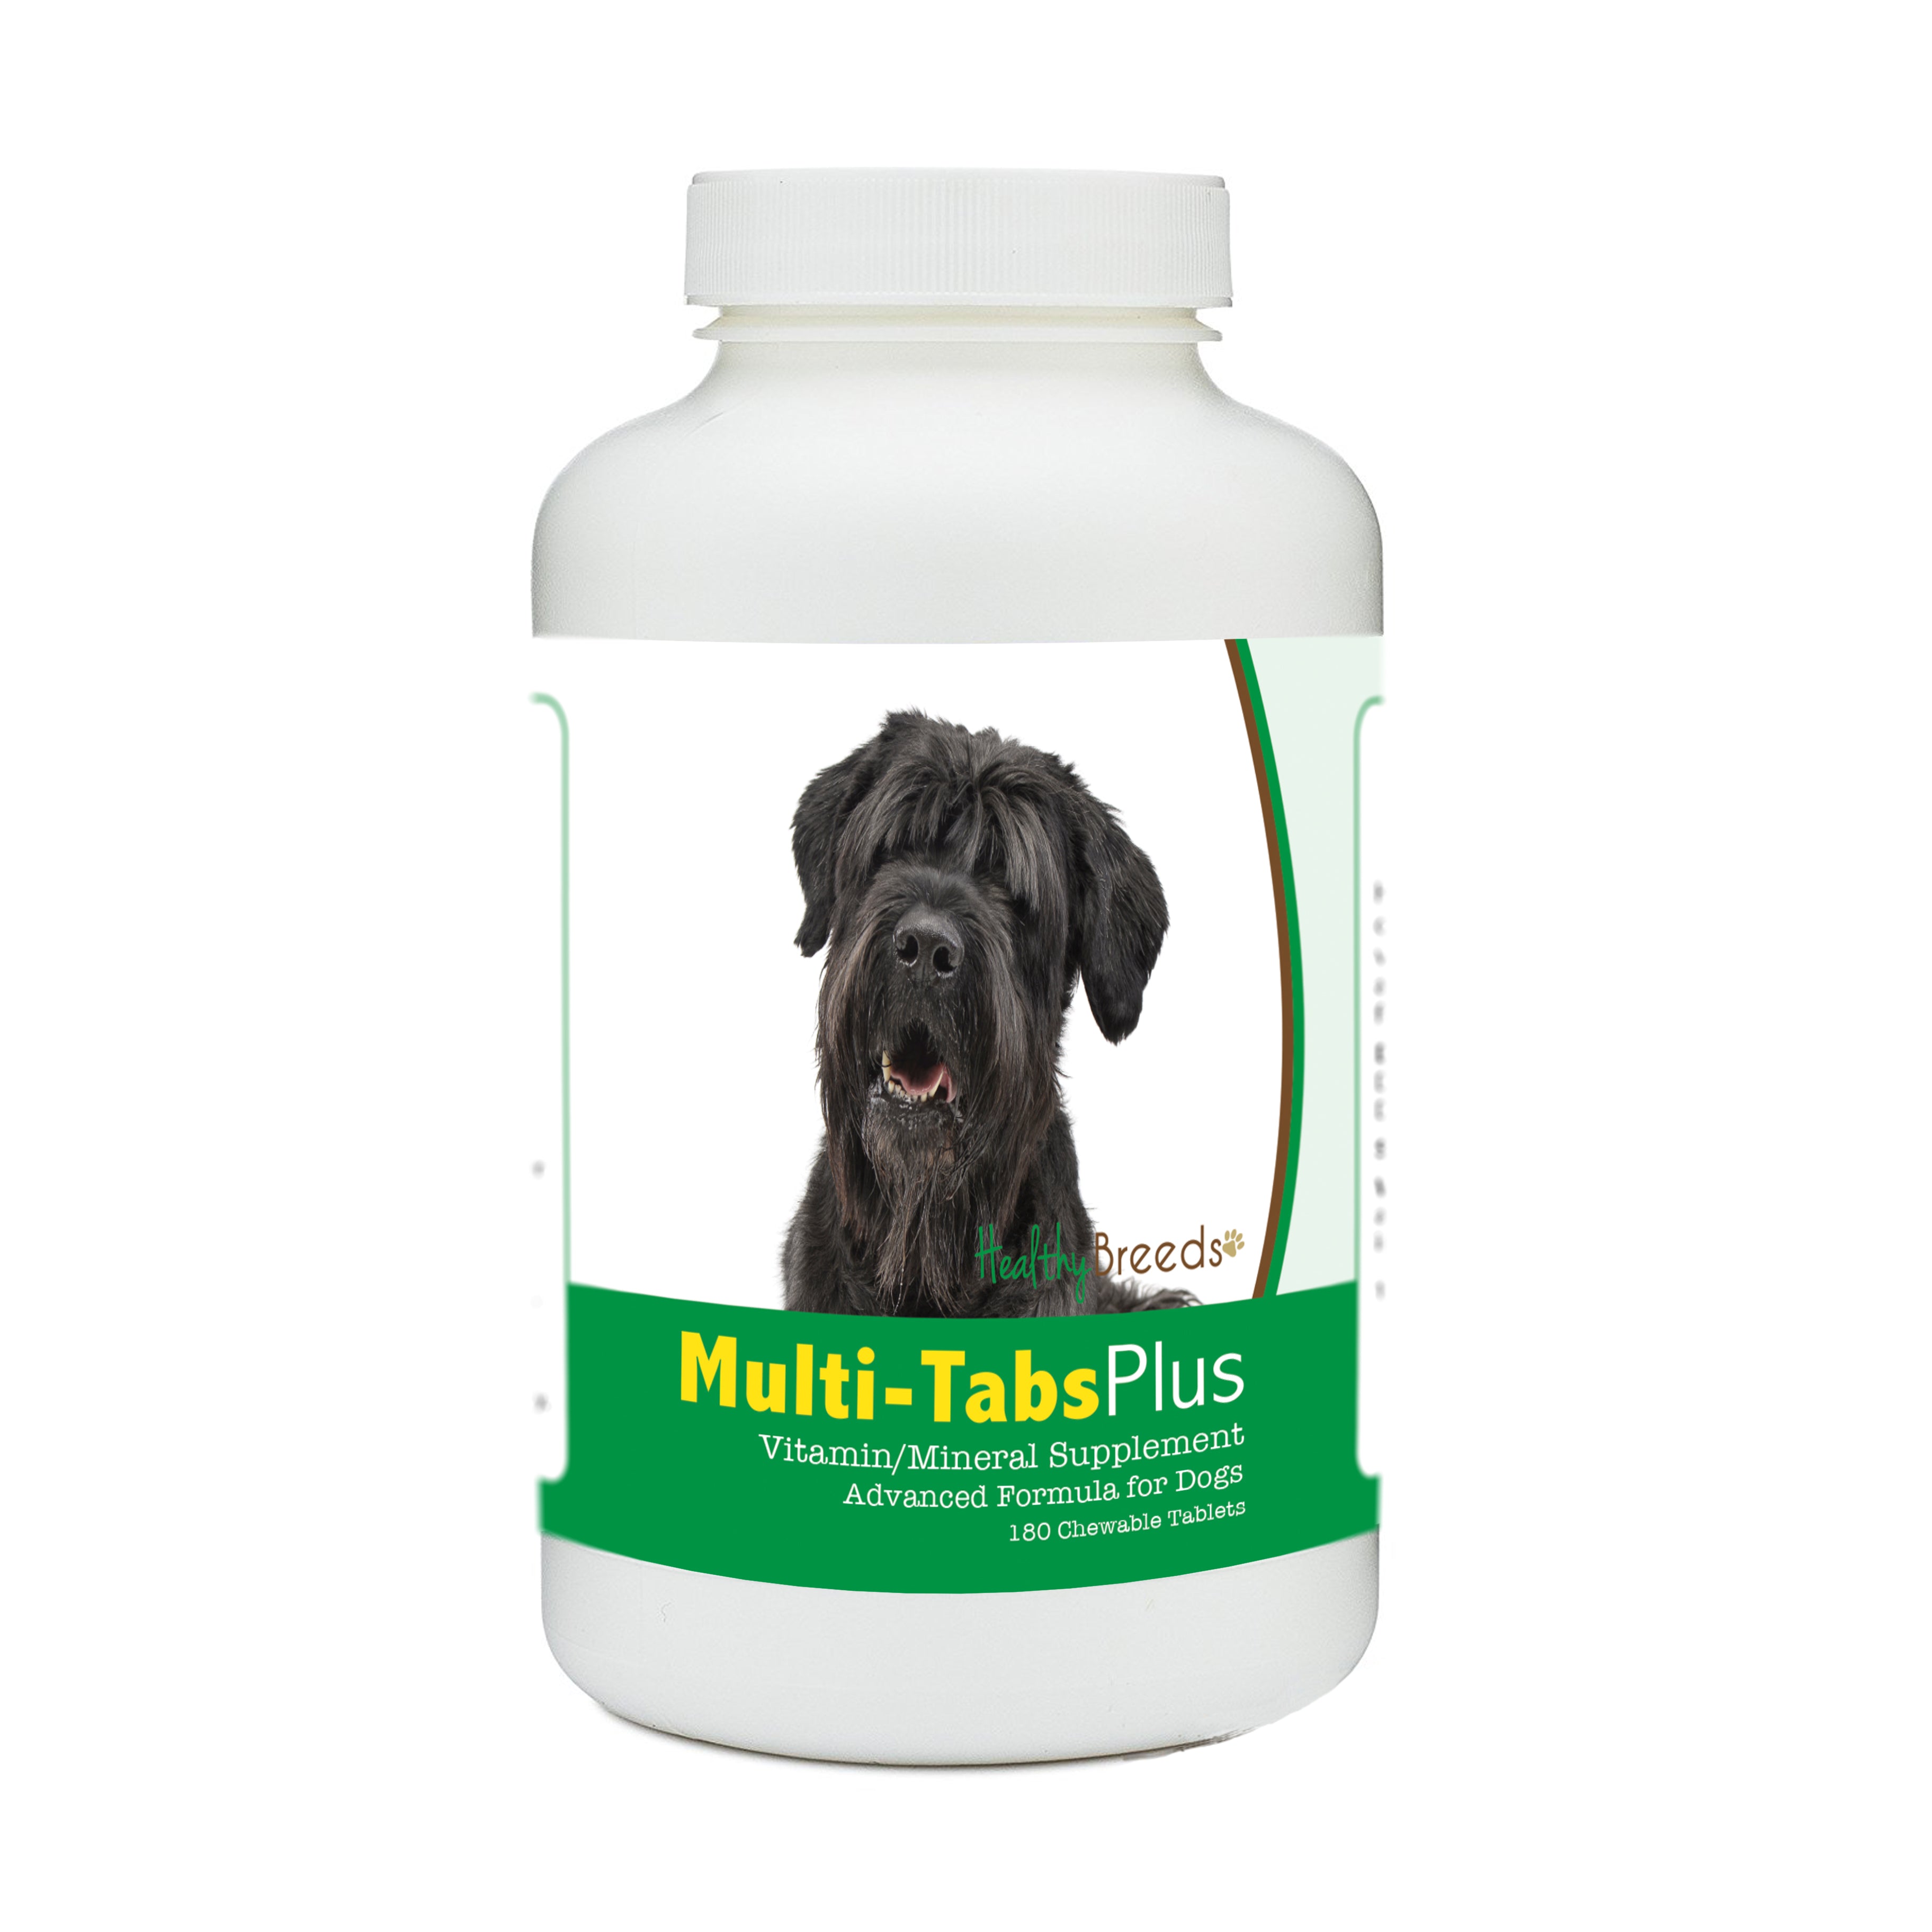 Black Russian Terrier Multi-Tabs Plus Chewable Tablets 180 Count